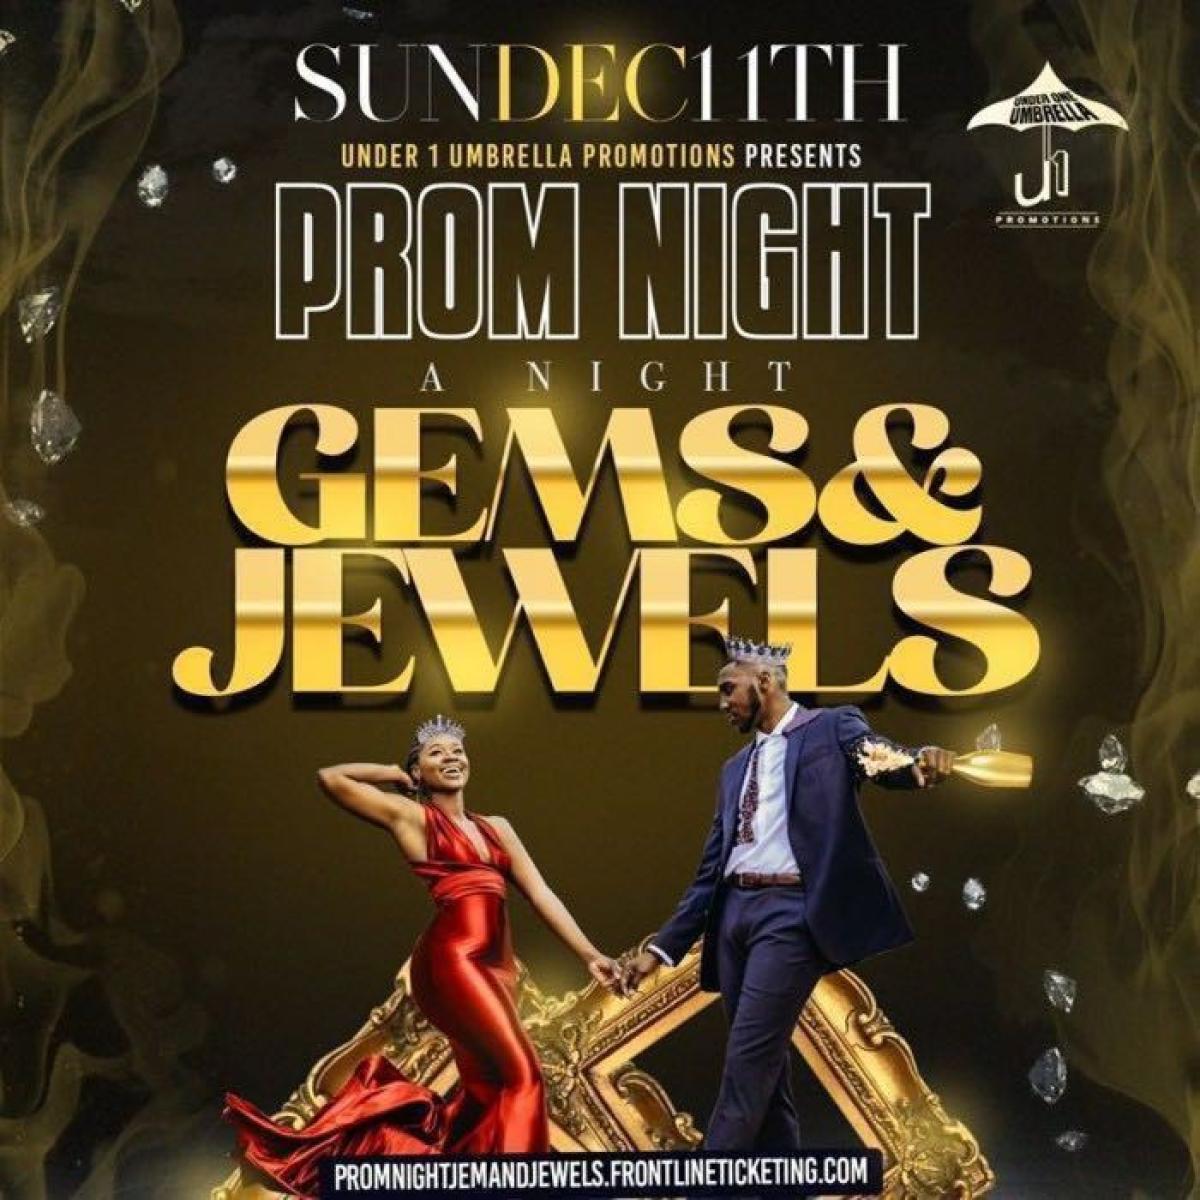 Prom Night 'A Night Of Gems & Jewels flyer or graphic.